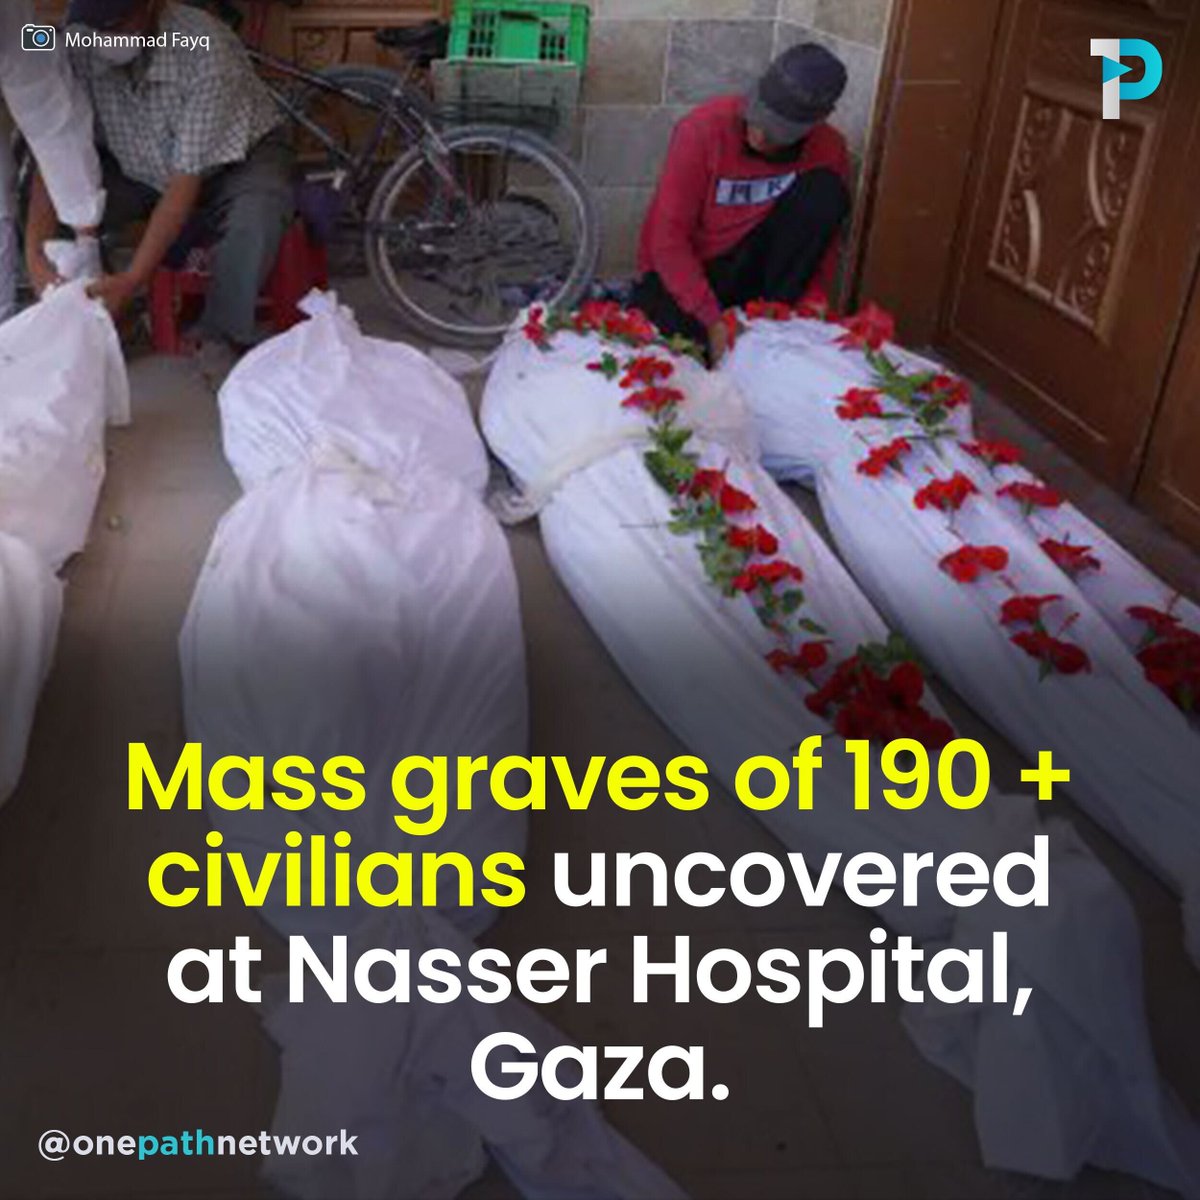 🚨🇮🇱 Now that Israeli forces are withdrawing troops, mass graves are turning up all over Gaza 📌Mass graves in Nasser Hospital. 190 + bodies being uncovered 📌Mass graves at Al Shifa Hospital 700 people executed, usually with arms tied behind their backs 📌We make dua that…